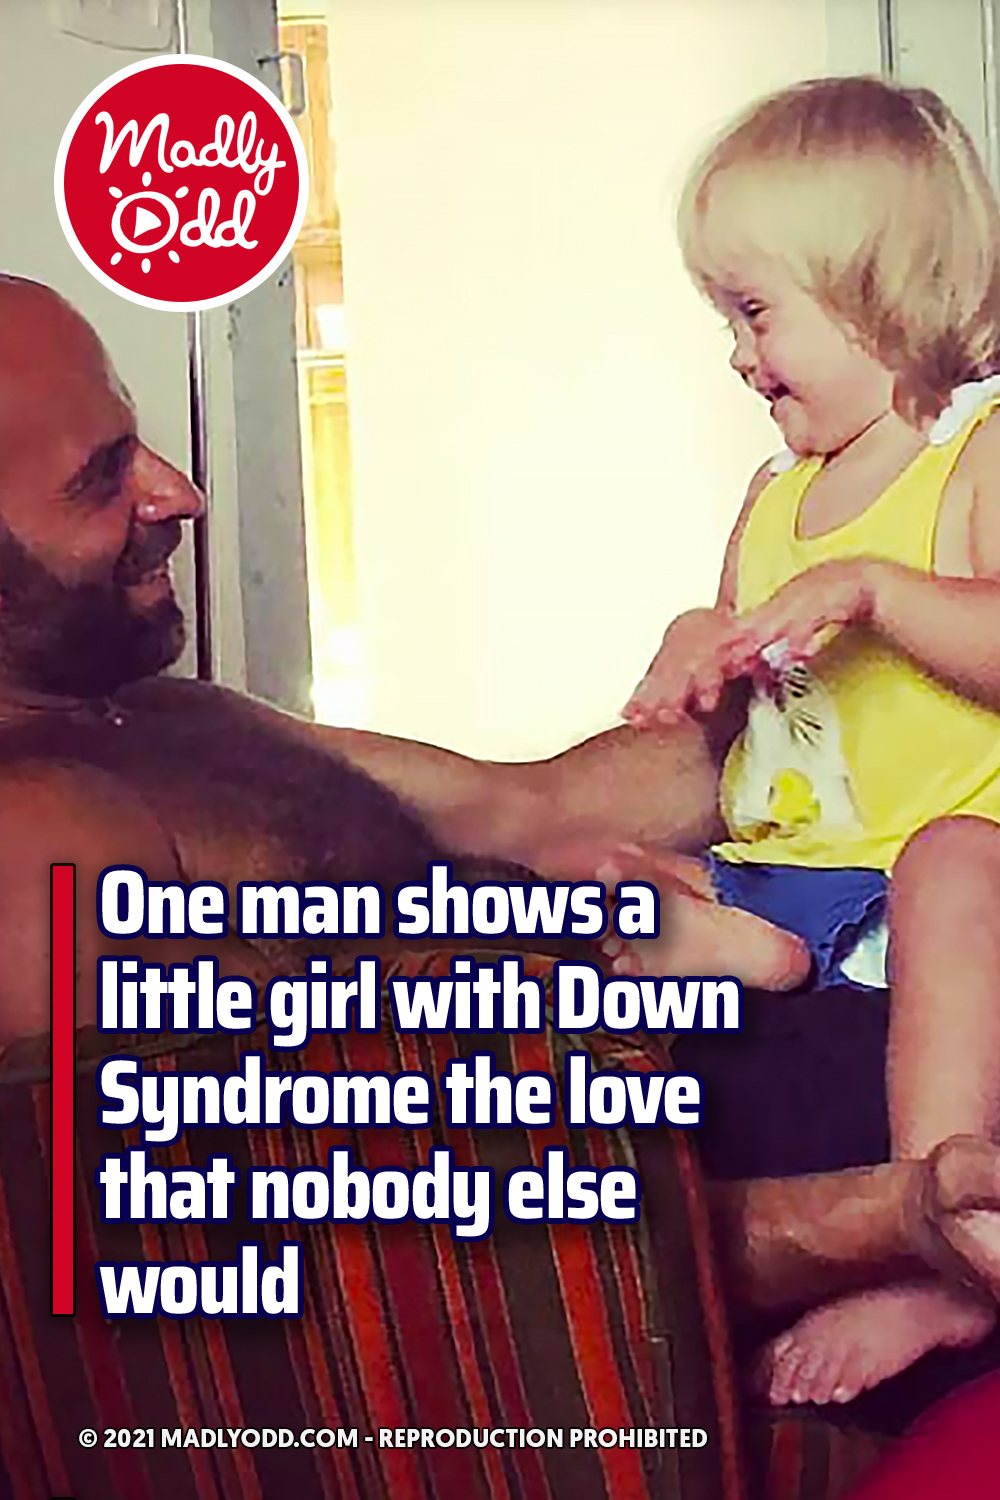 One man shows a little girl with Down Syndrome the love that nobody else would